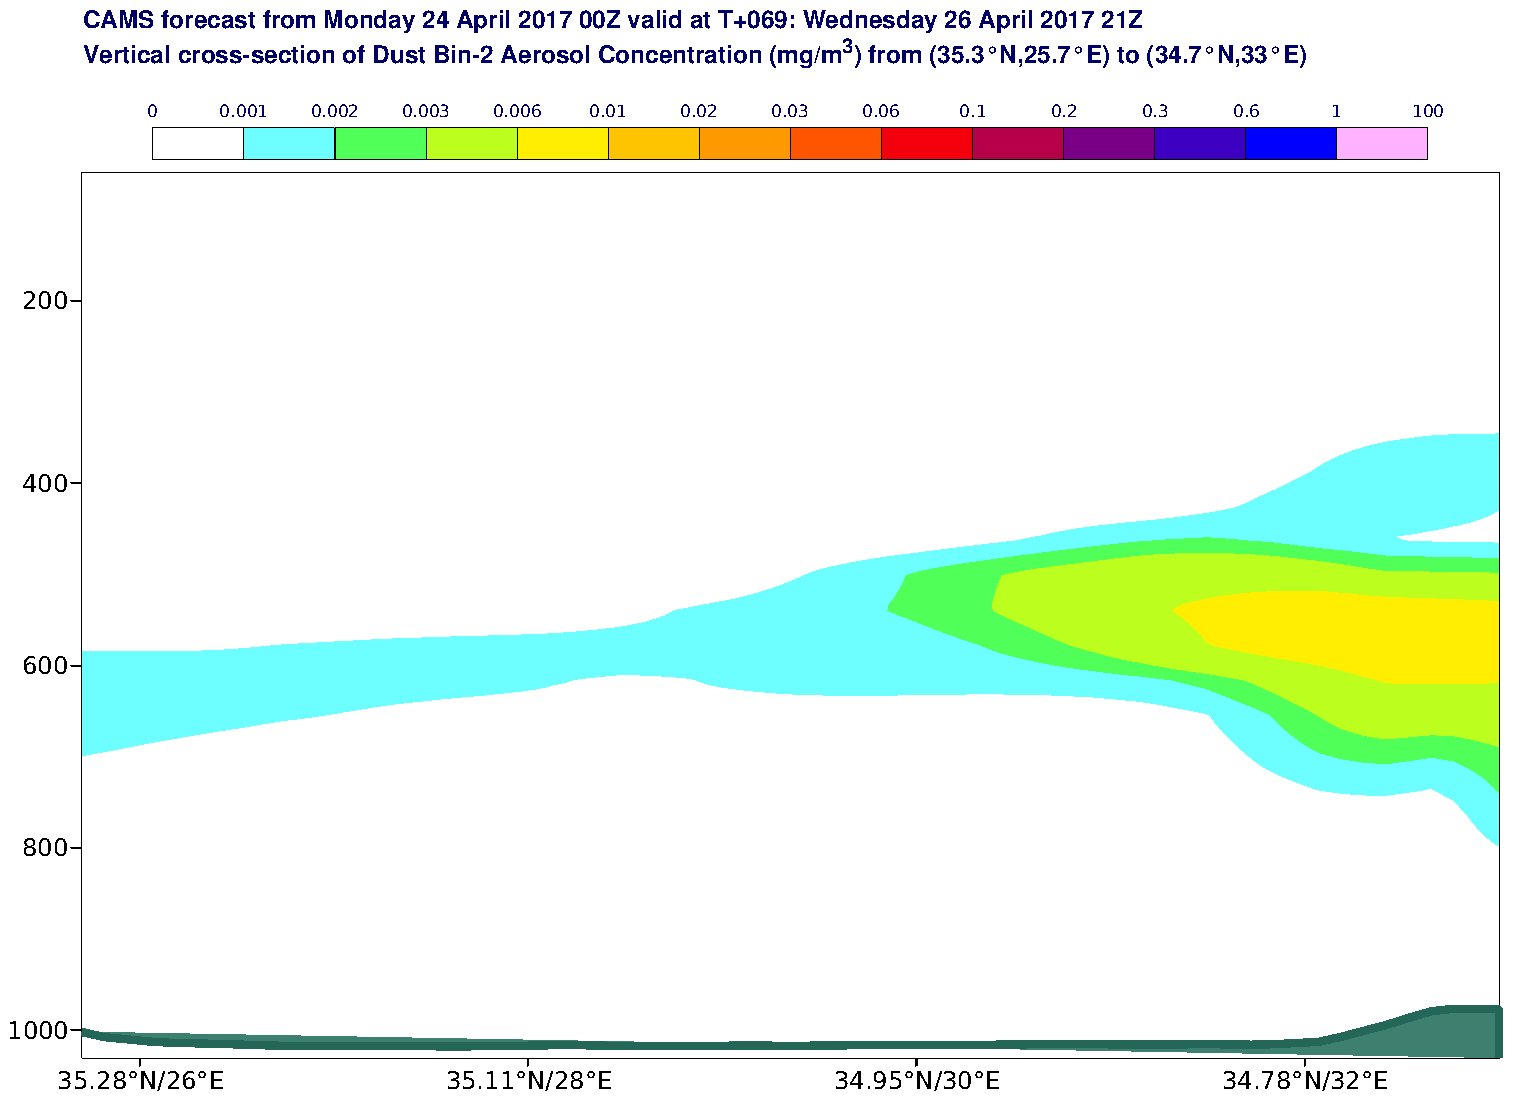 Vertical cross-section of Dust Bin-2 Aerosol Concentration (mg/m3) valid at T69 - 2017-04-26 21:00